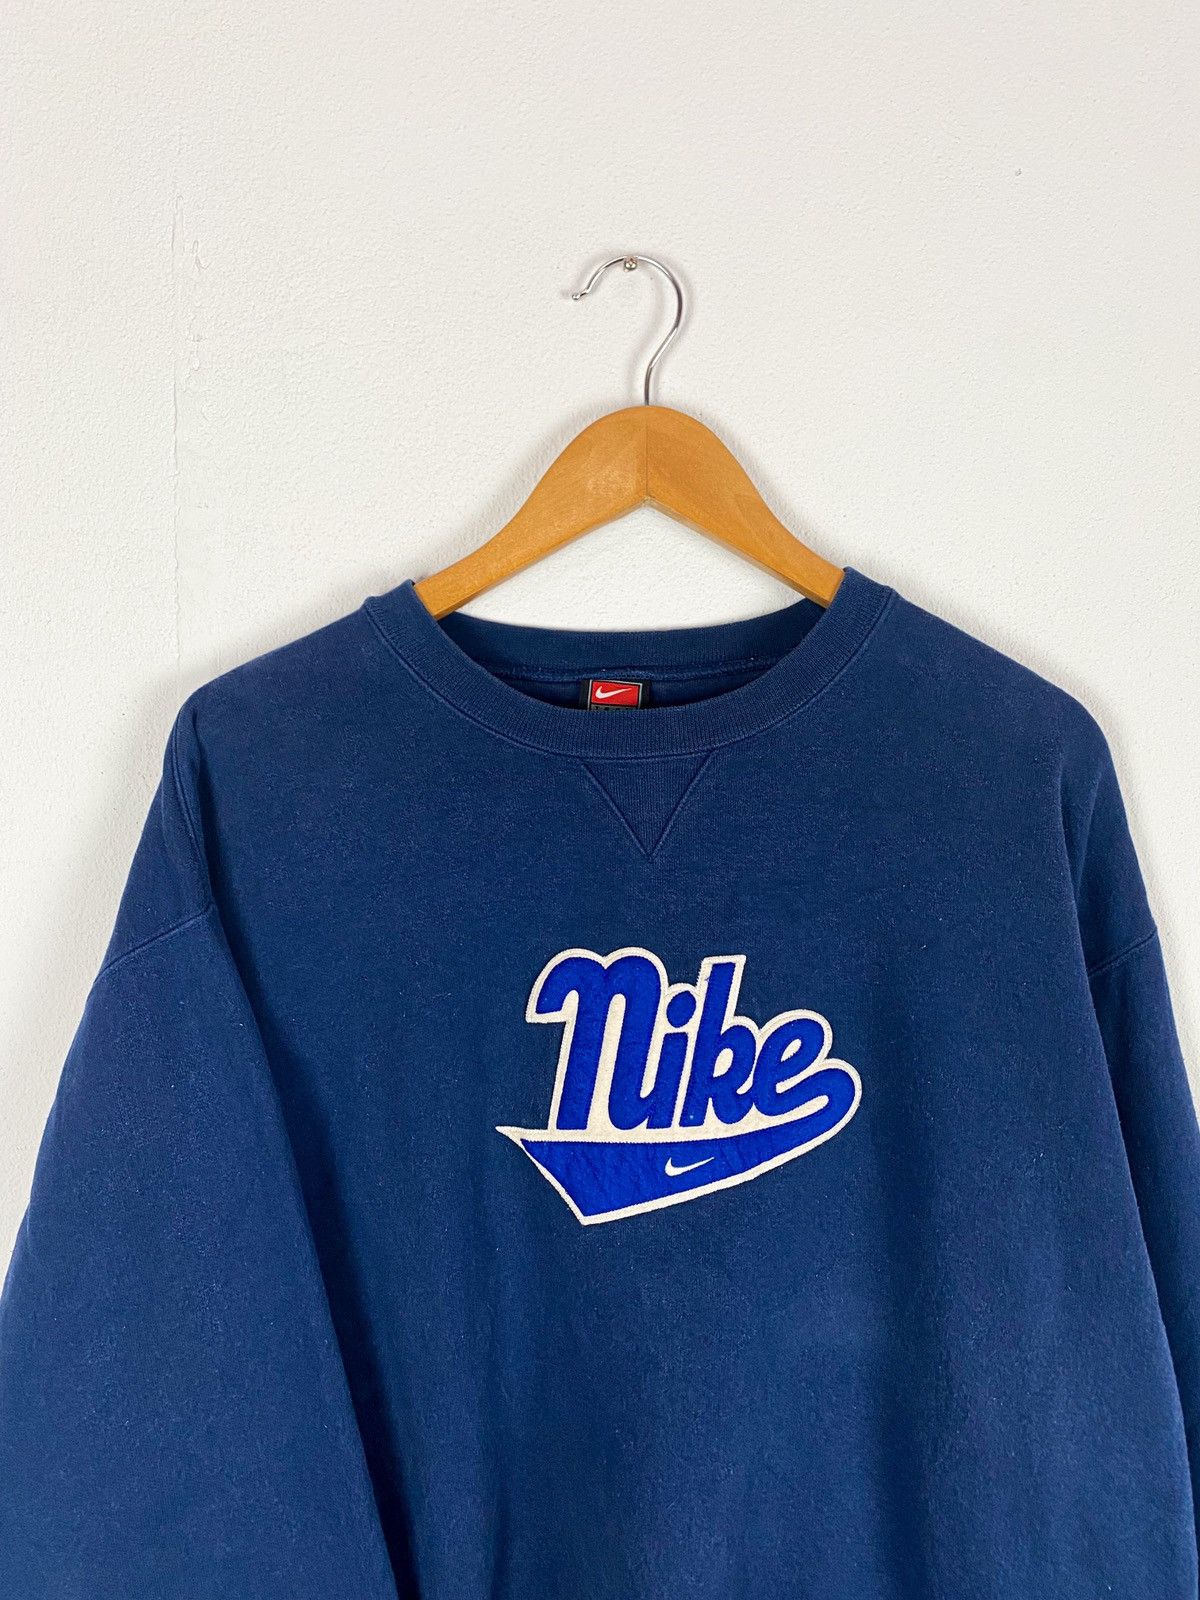 Nike Vintage Nike Spell Out Sweatshirt Size US L / EU 52-54 / 3 - 2 Preview